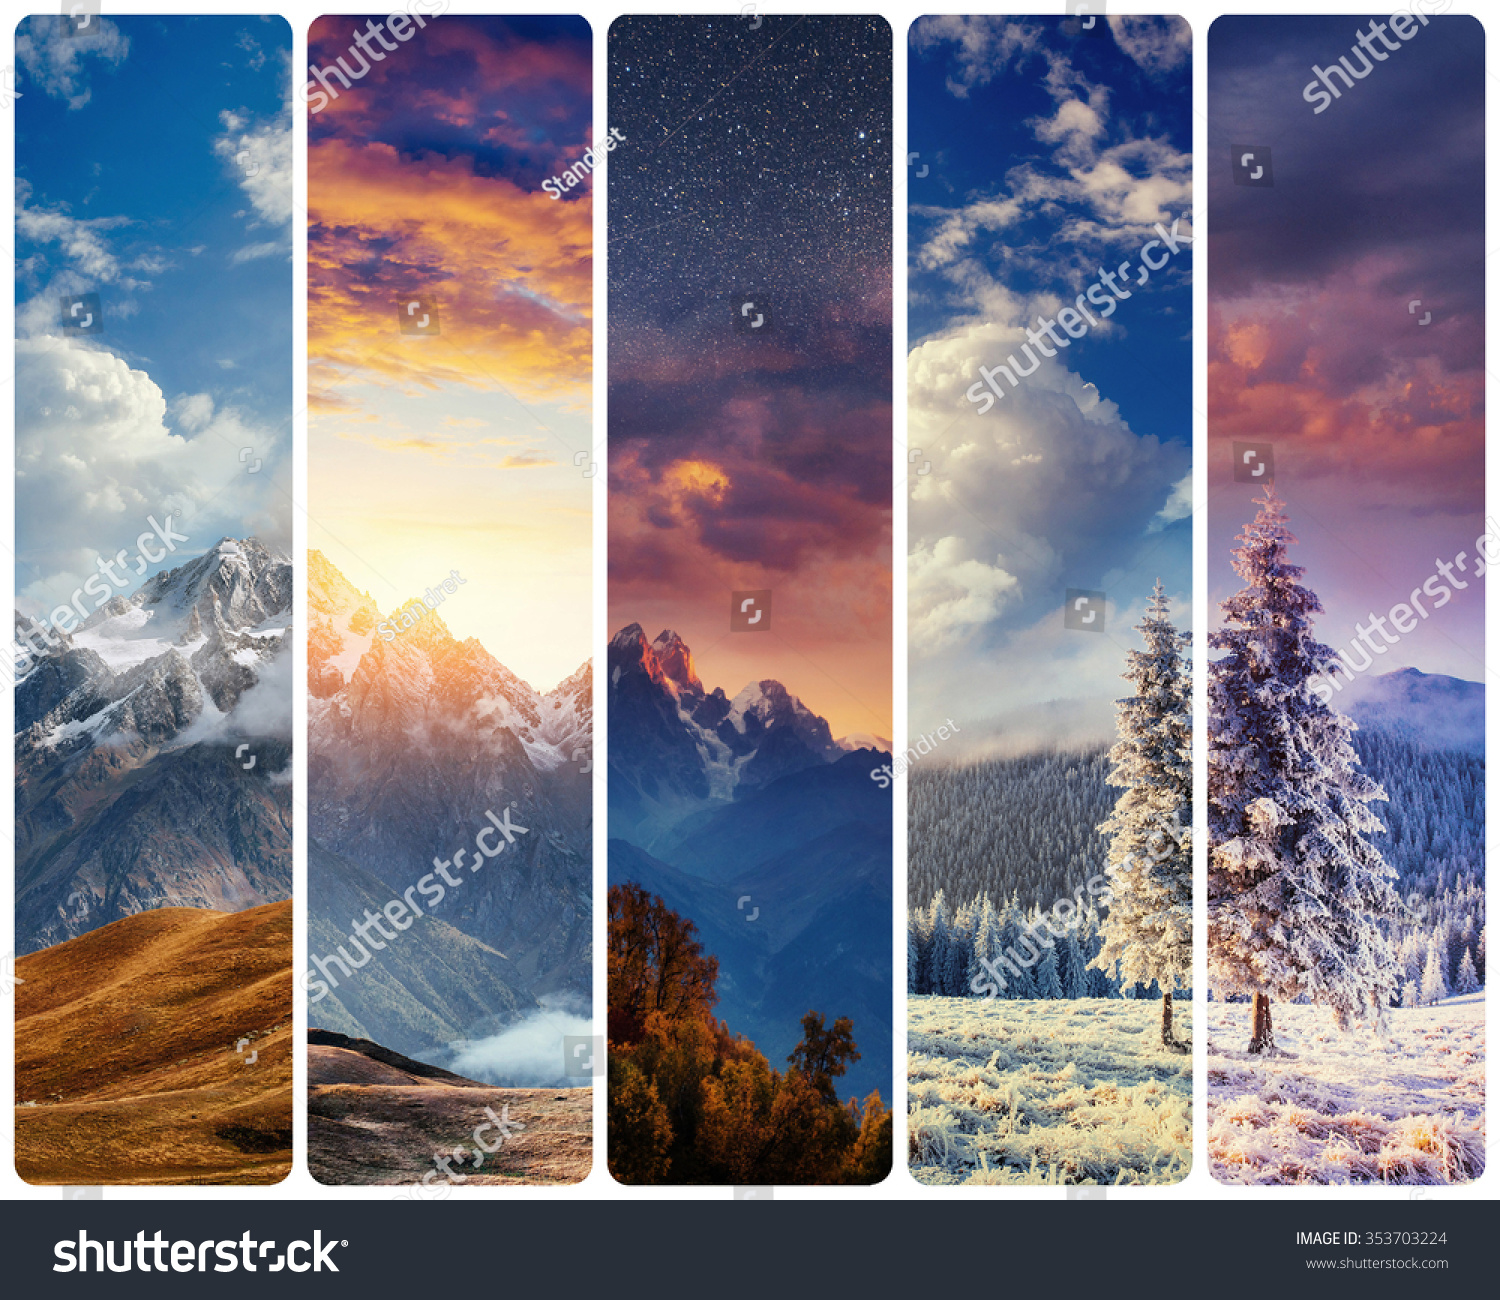 Creative collage majestic mountains in different seasons. Instagram tonic effect. #353703224